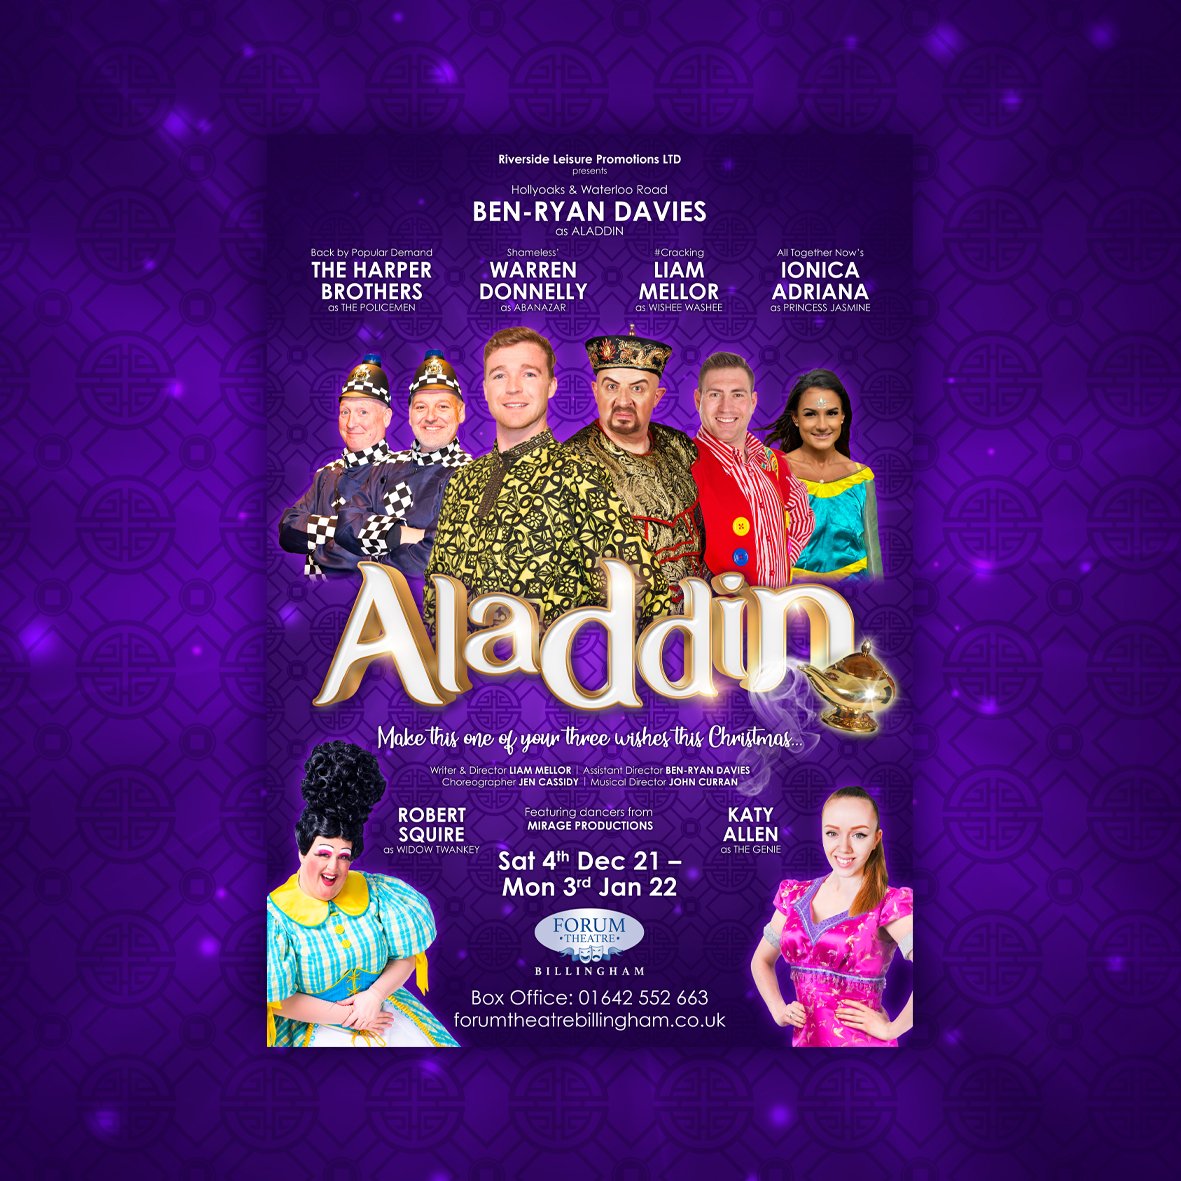 Riverside Aladdin | Eye-catching Posters and Merchandise Designed by Hot Rock Group